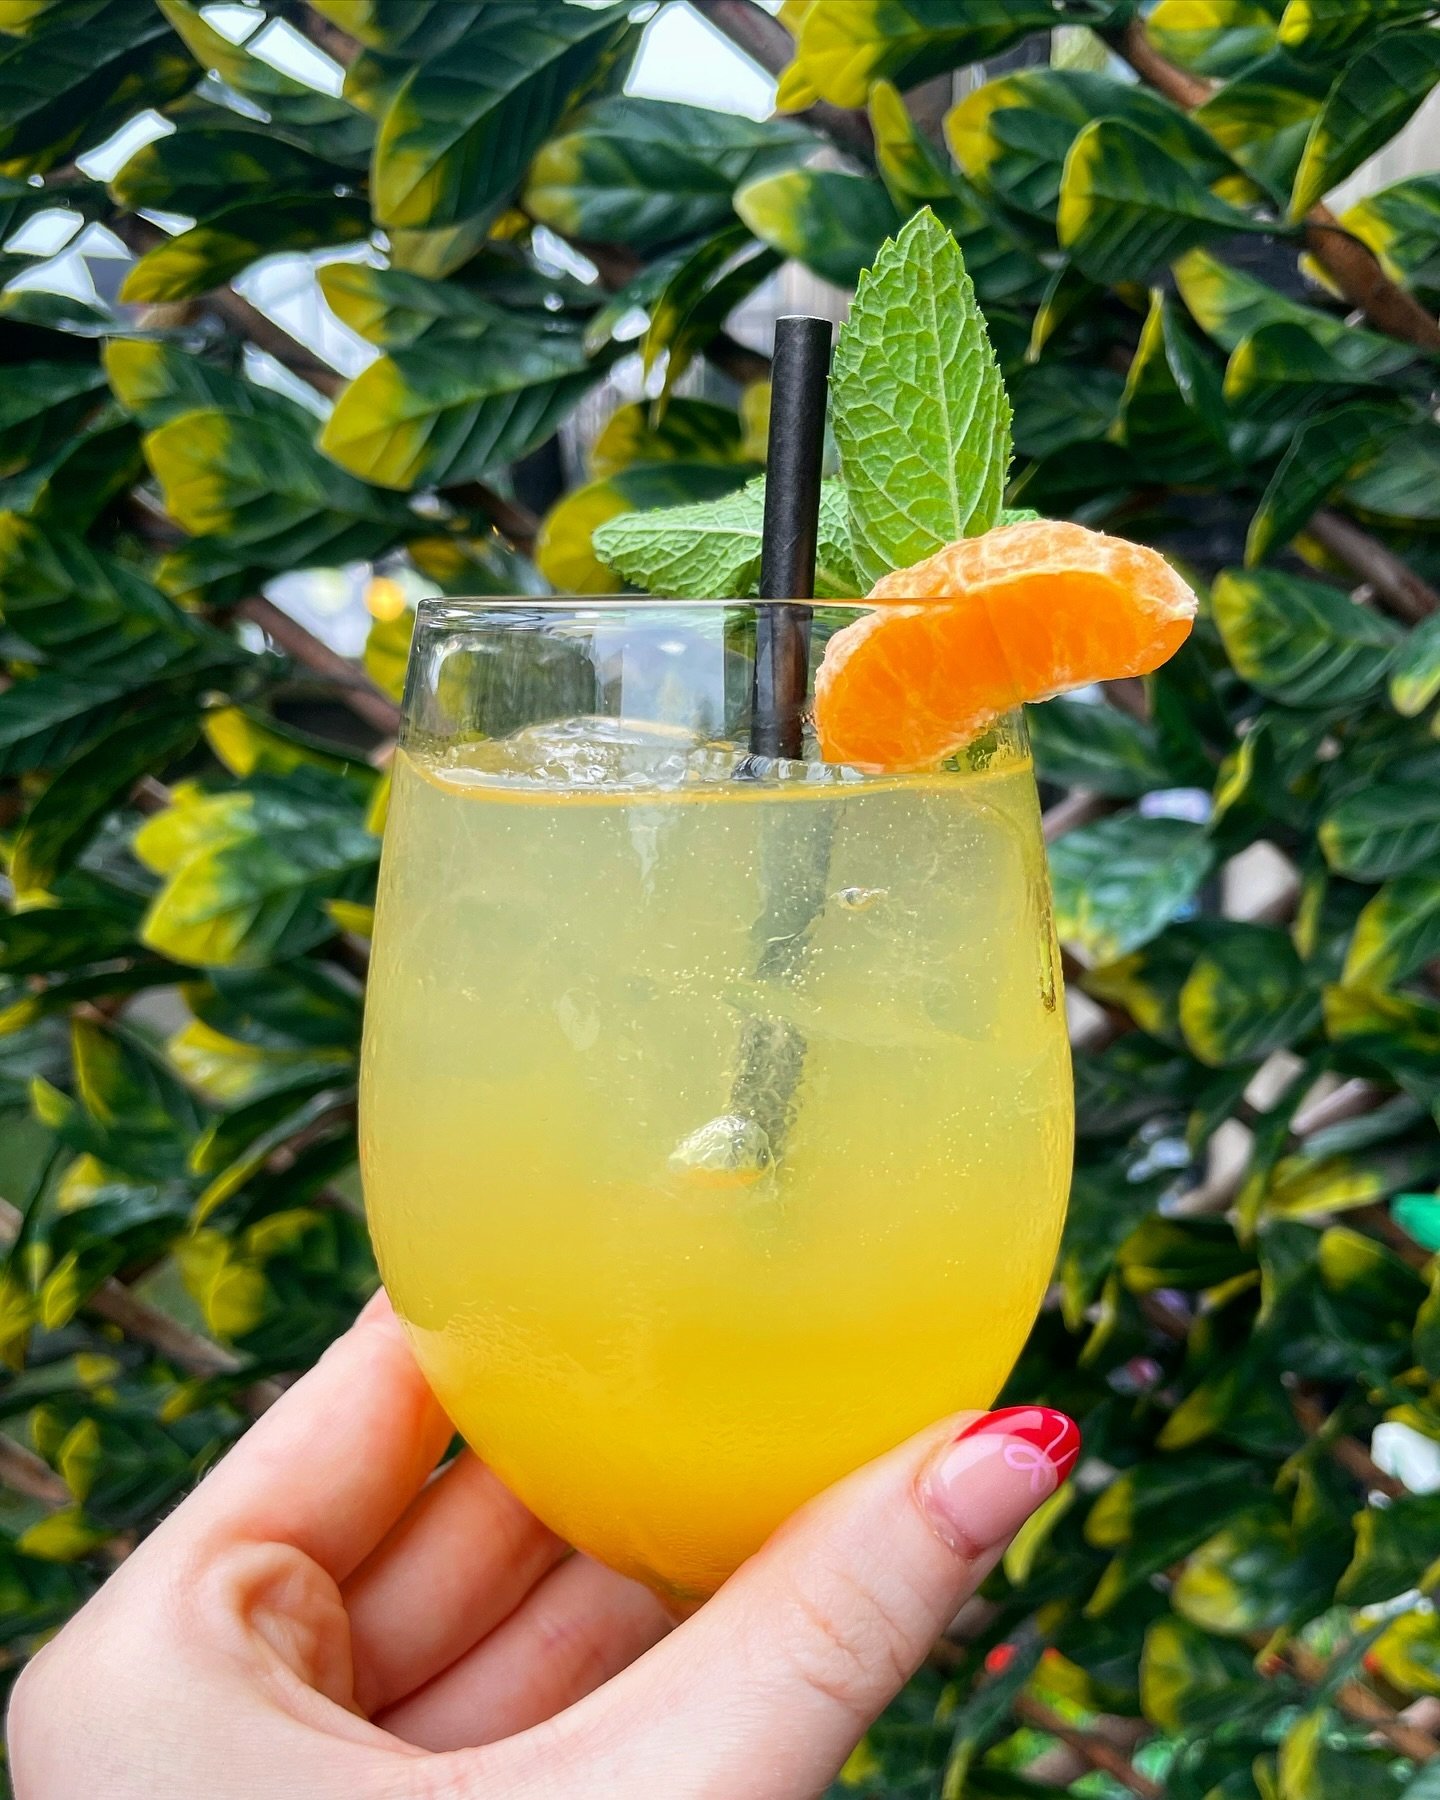 ✨🍊TANGERINE DREAM🍊✨//GIVEAWAY//

Our summer cocktail of the moment: fun, fizzy and refreshing 🧡💛🧡

Dine @rollobroughton , follow us and tag us in your fabulous pics to get our cocktail of the week on the house! 📸 xxx

Tune in every week to snap